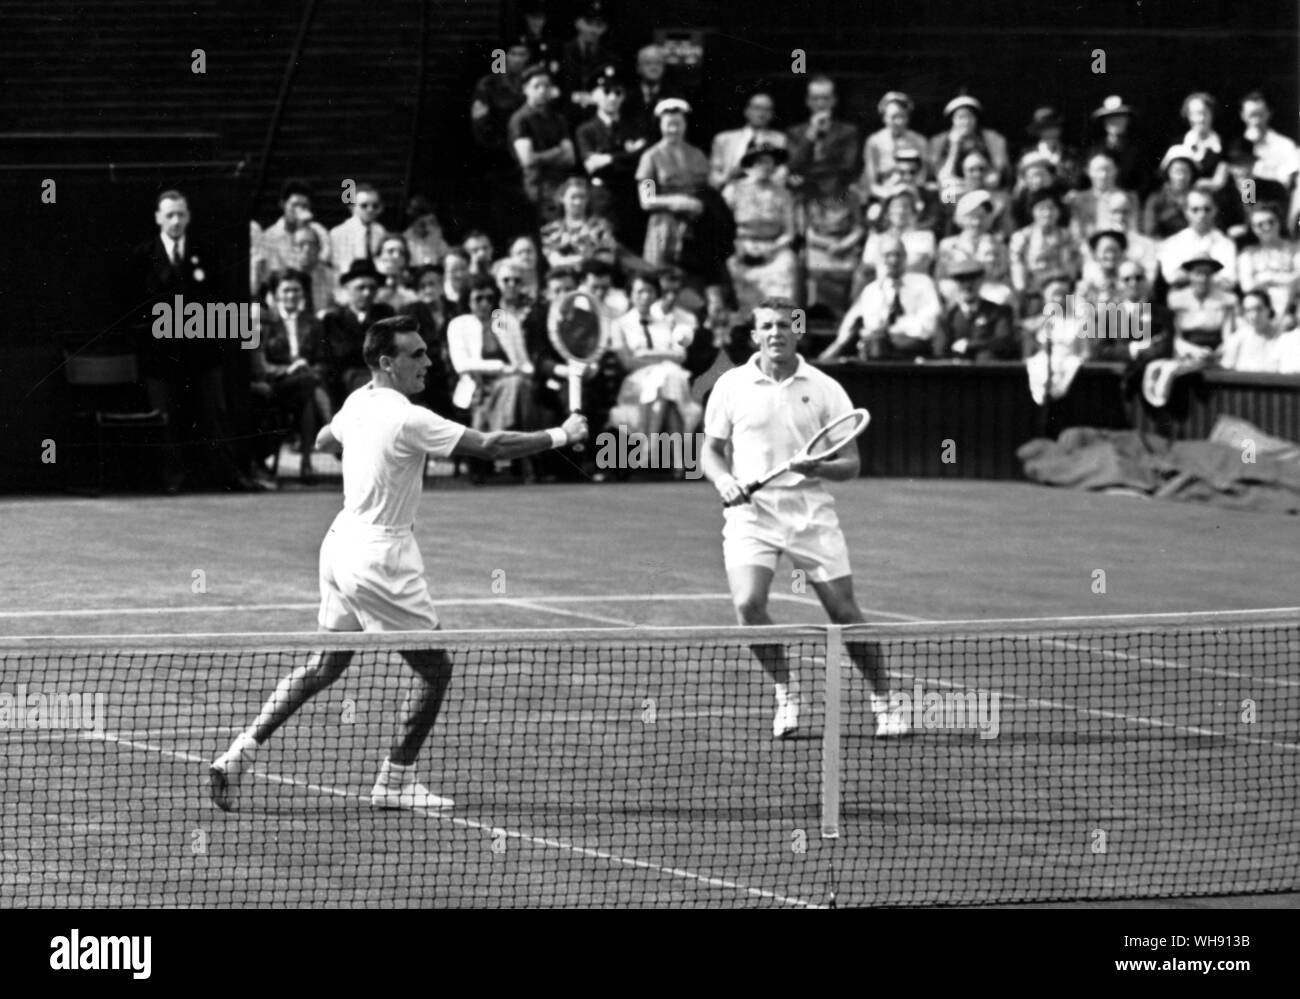 Vic Seixes (l) and Tony Trabert, who lost to Rex Hartwig and Mervyn Rose in 1954. The winners' score was 6-4, 6-4, 3-6, 6-4. Stock Photo